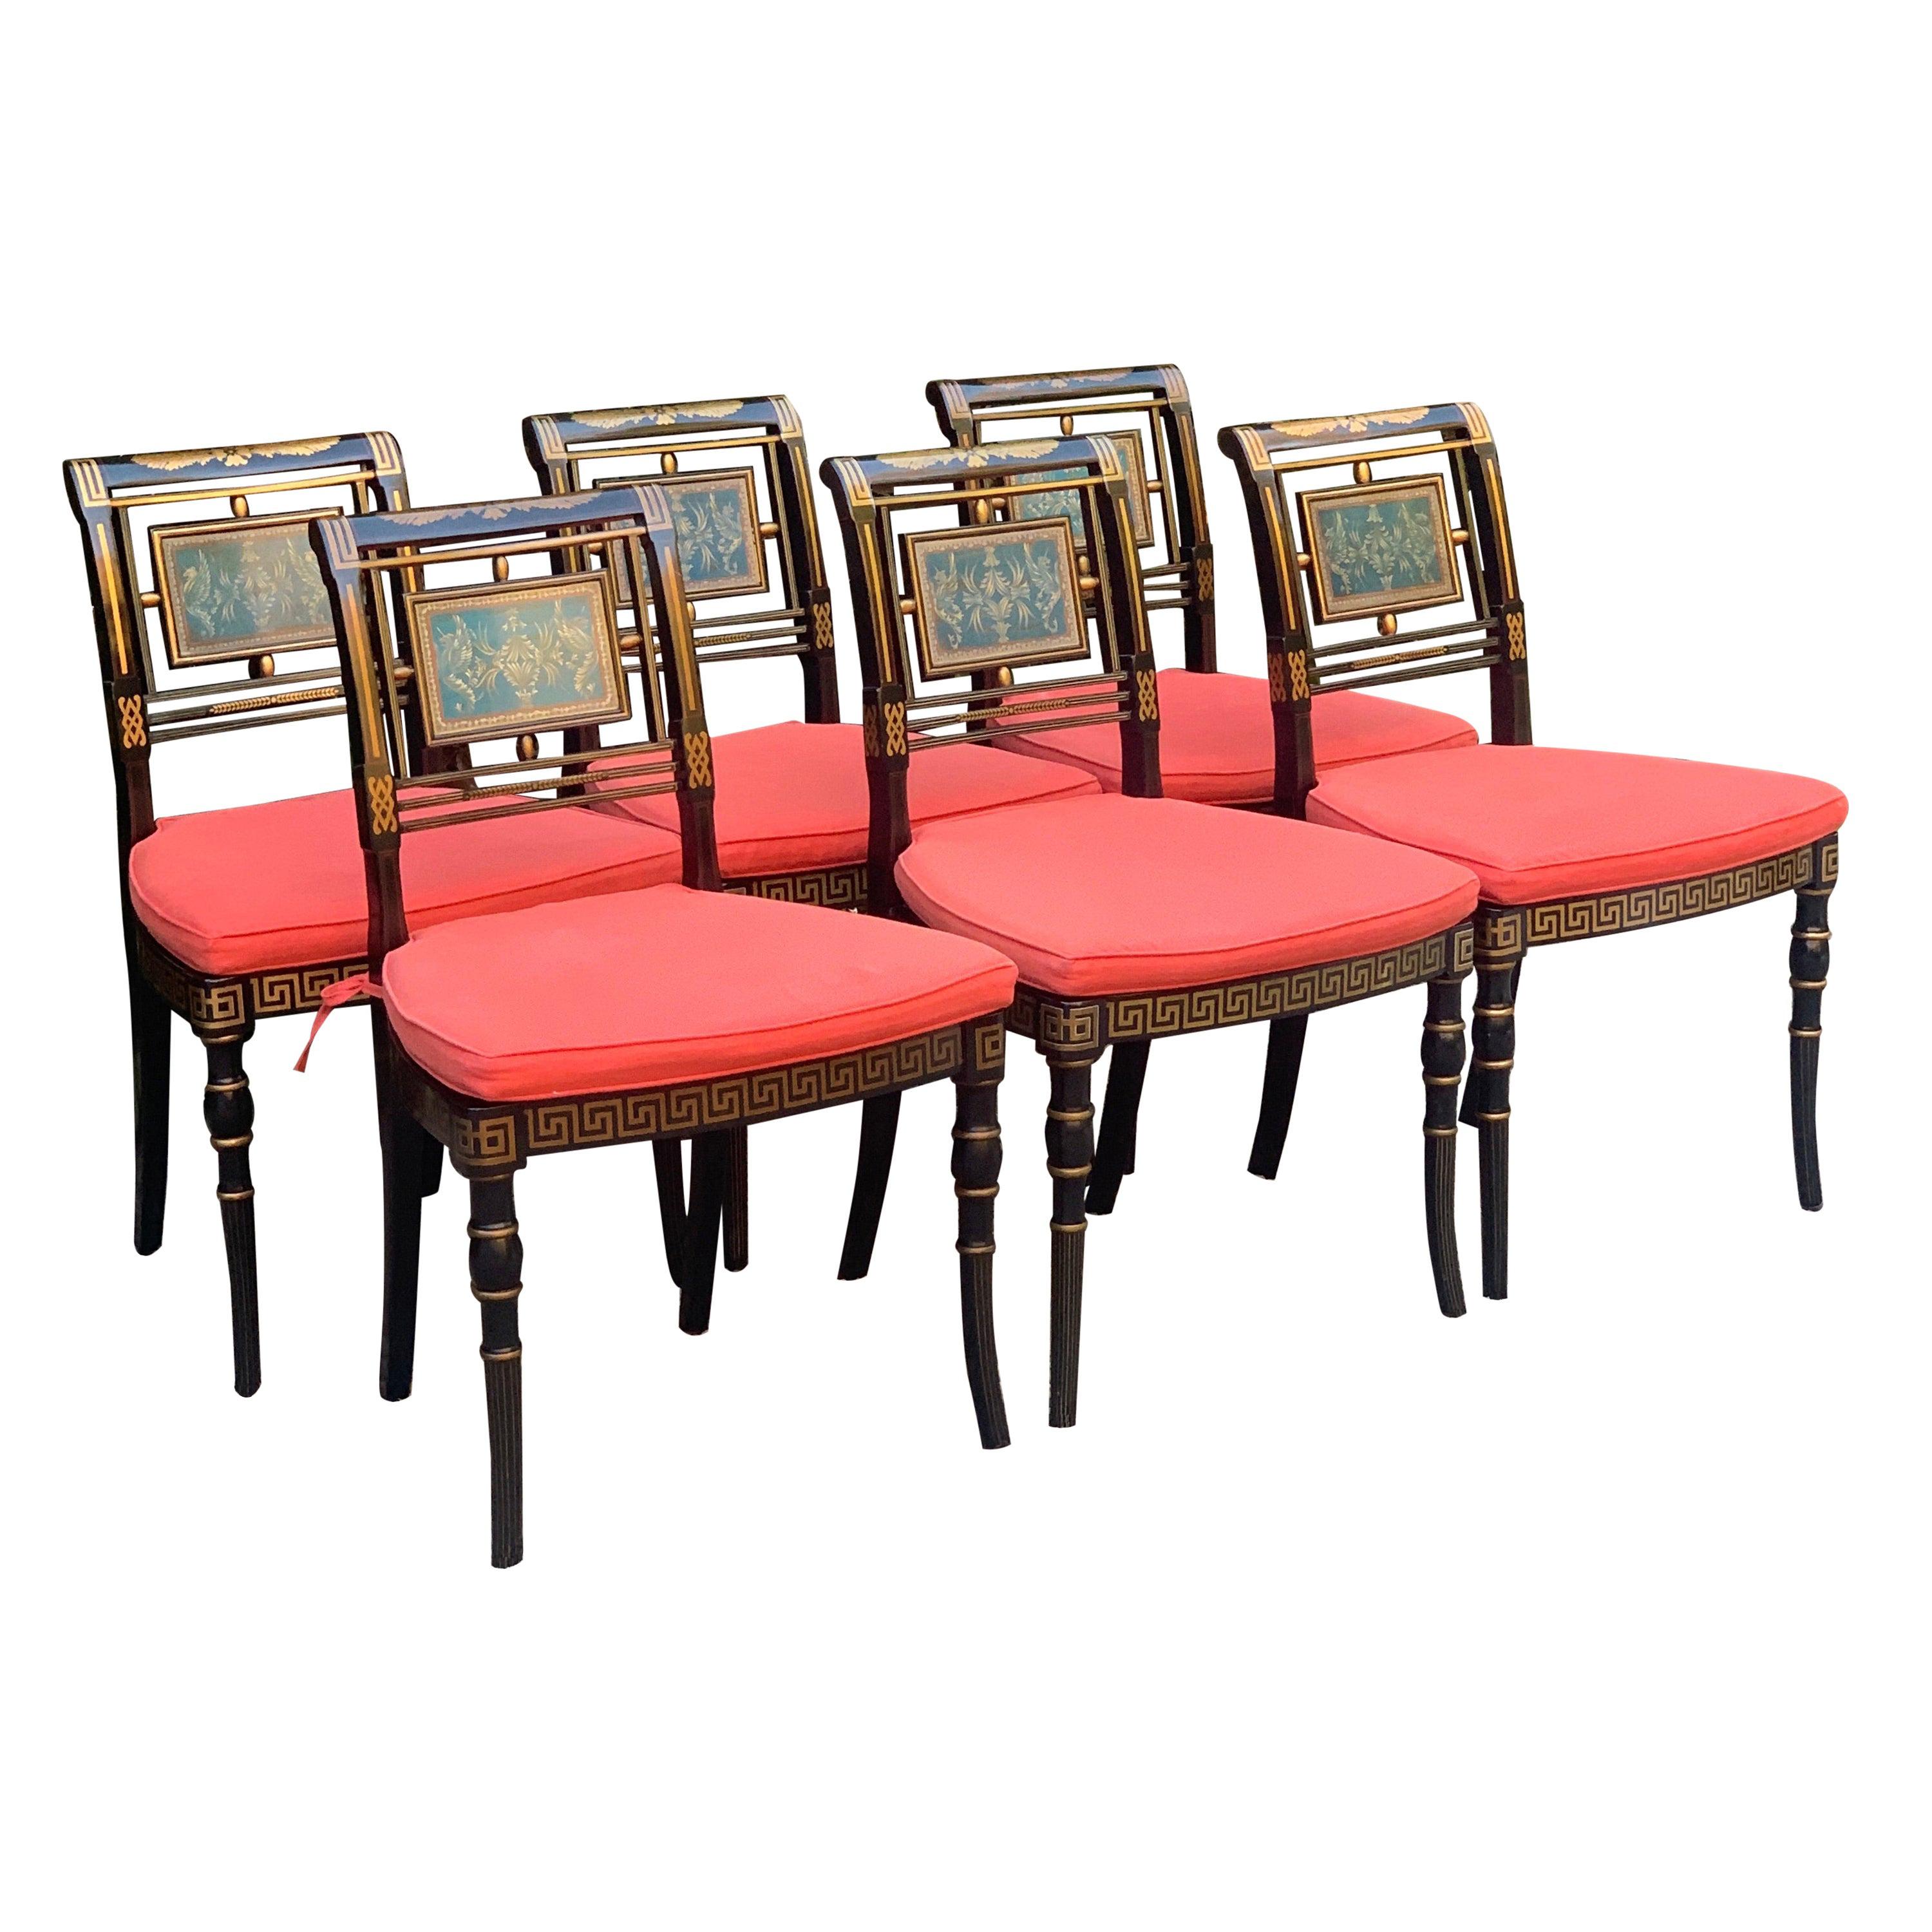 Six Hollywood Regency Lacquered Dining Chairs with Cushions